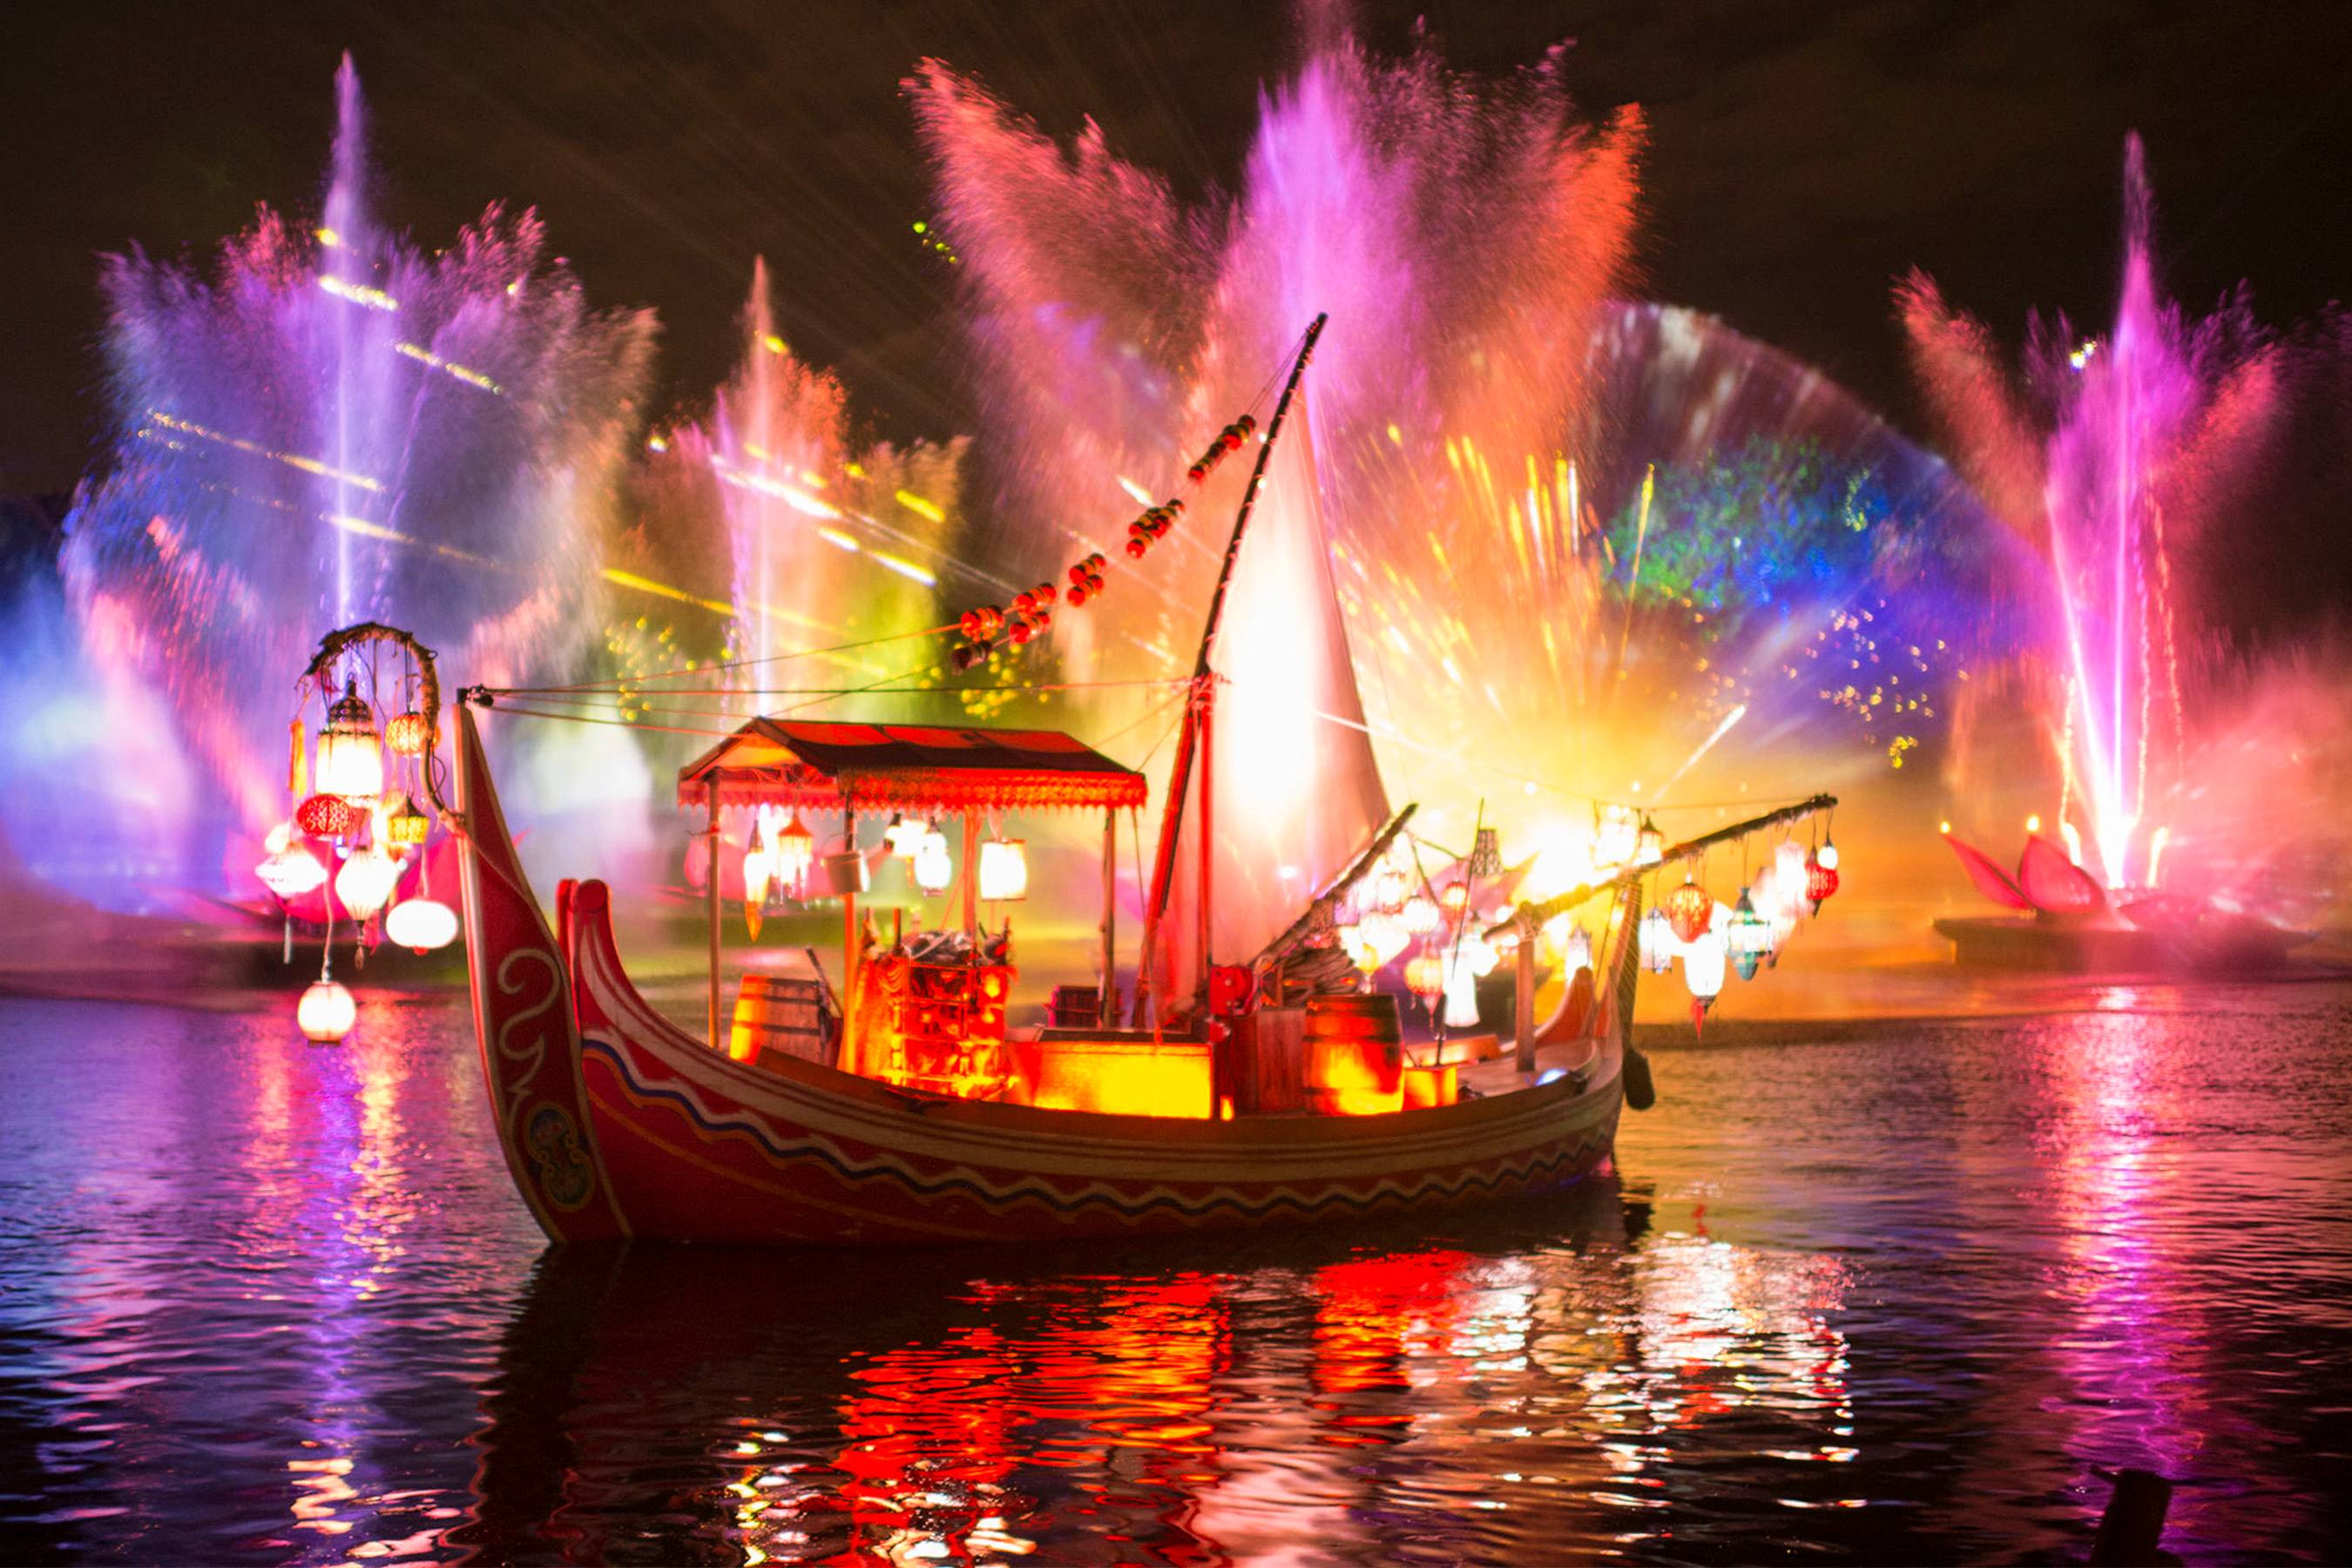 Rivers of Light - First impressions